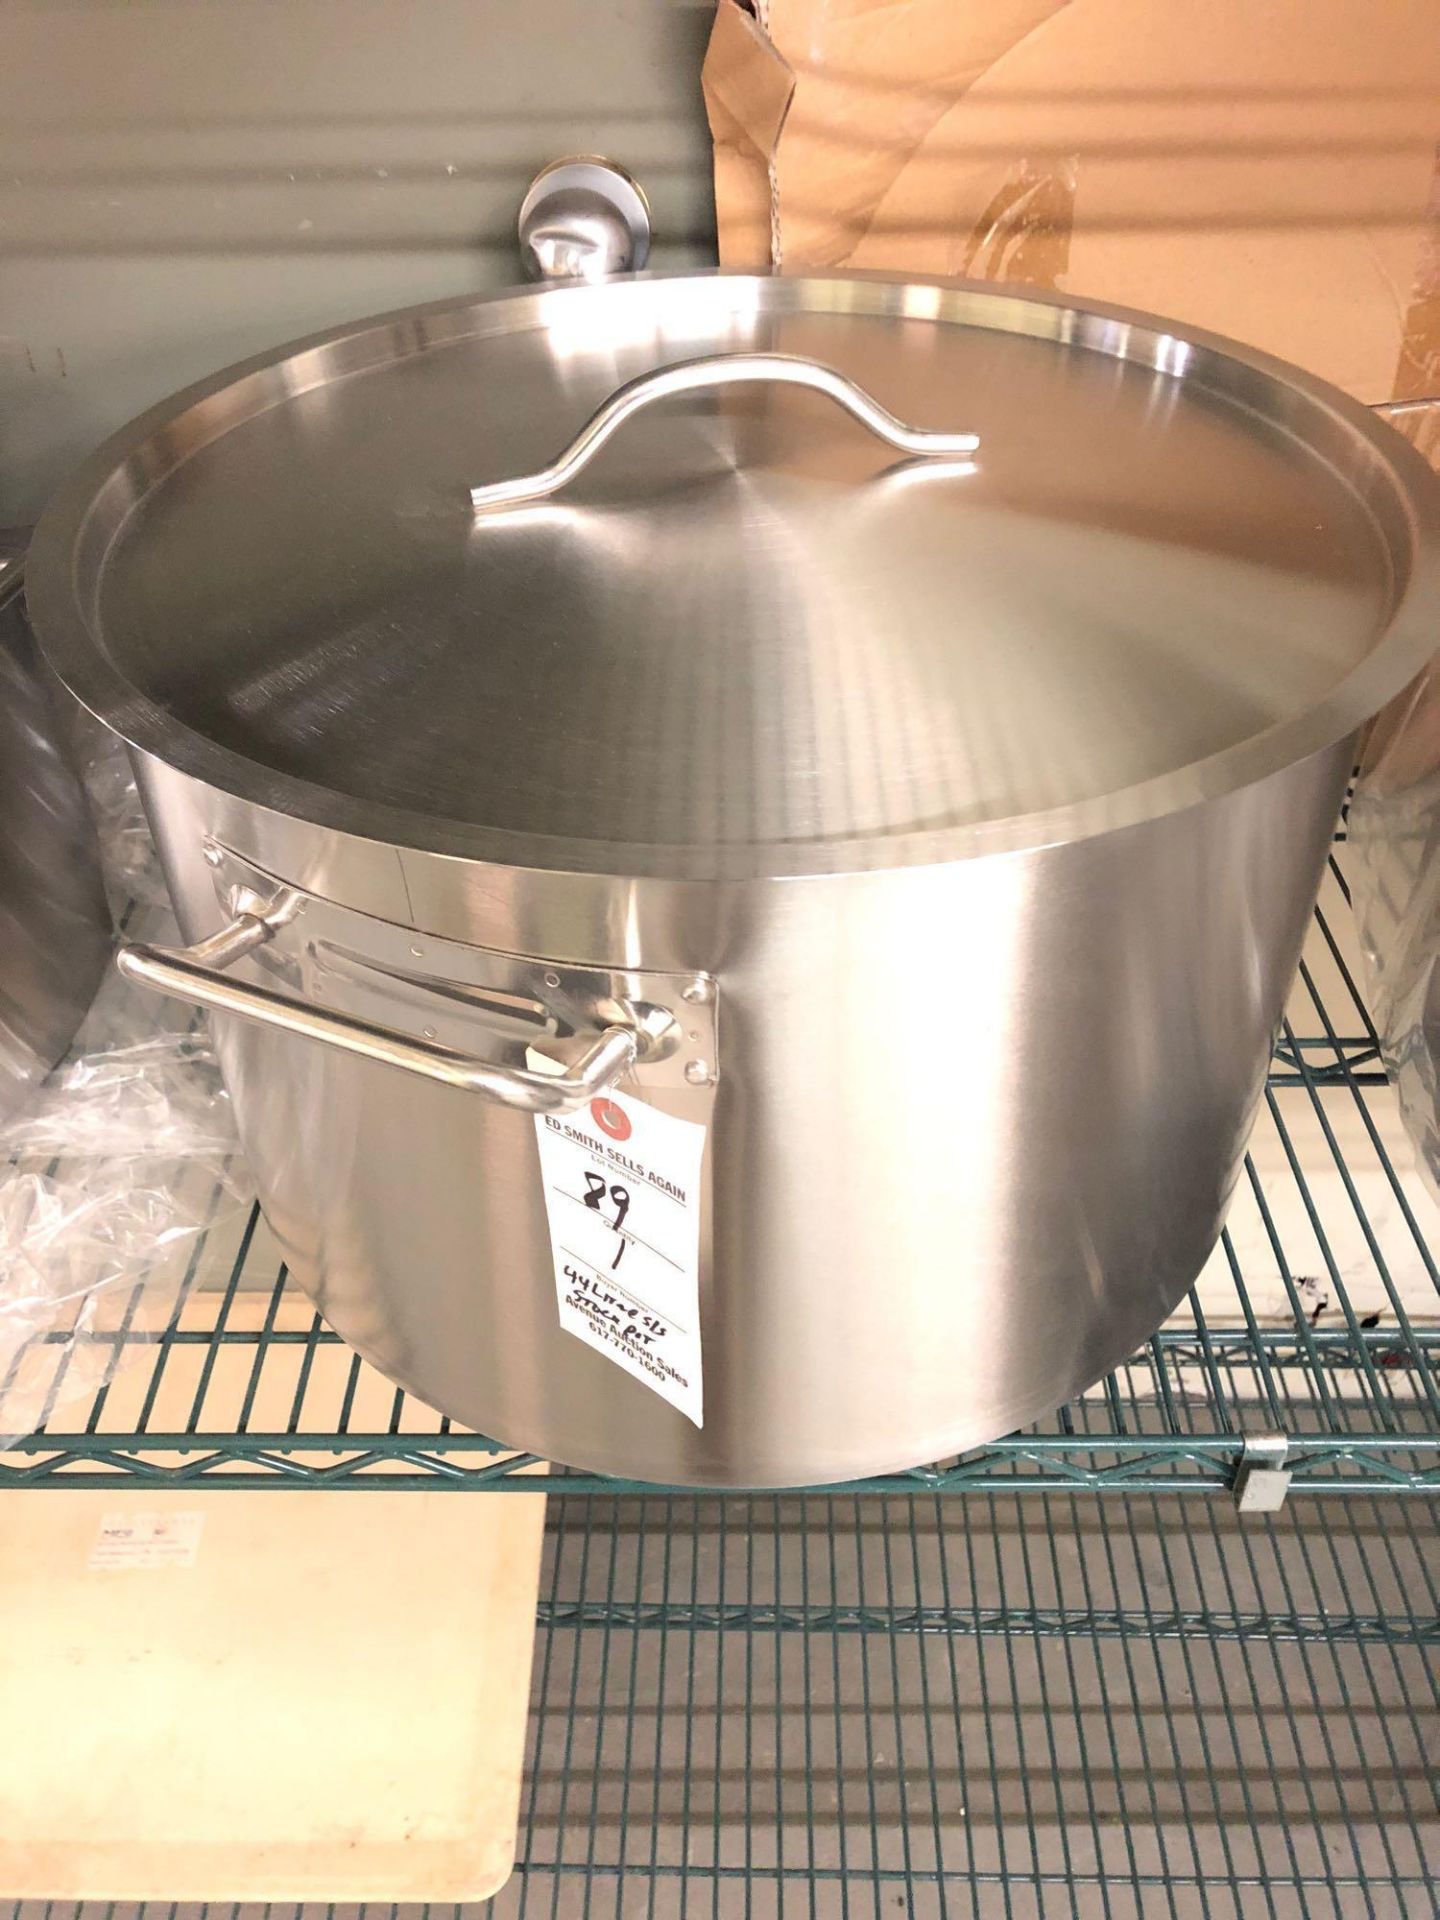 44 L stainless steel stockpot with cover